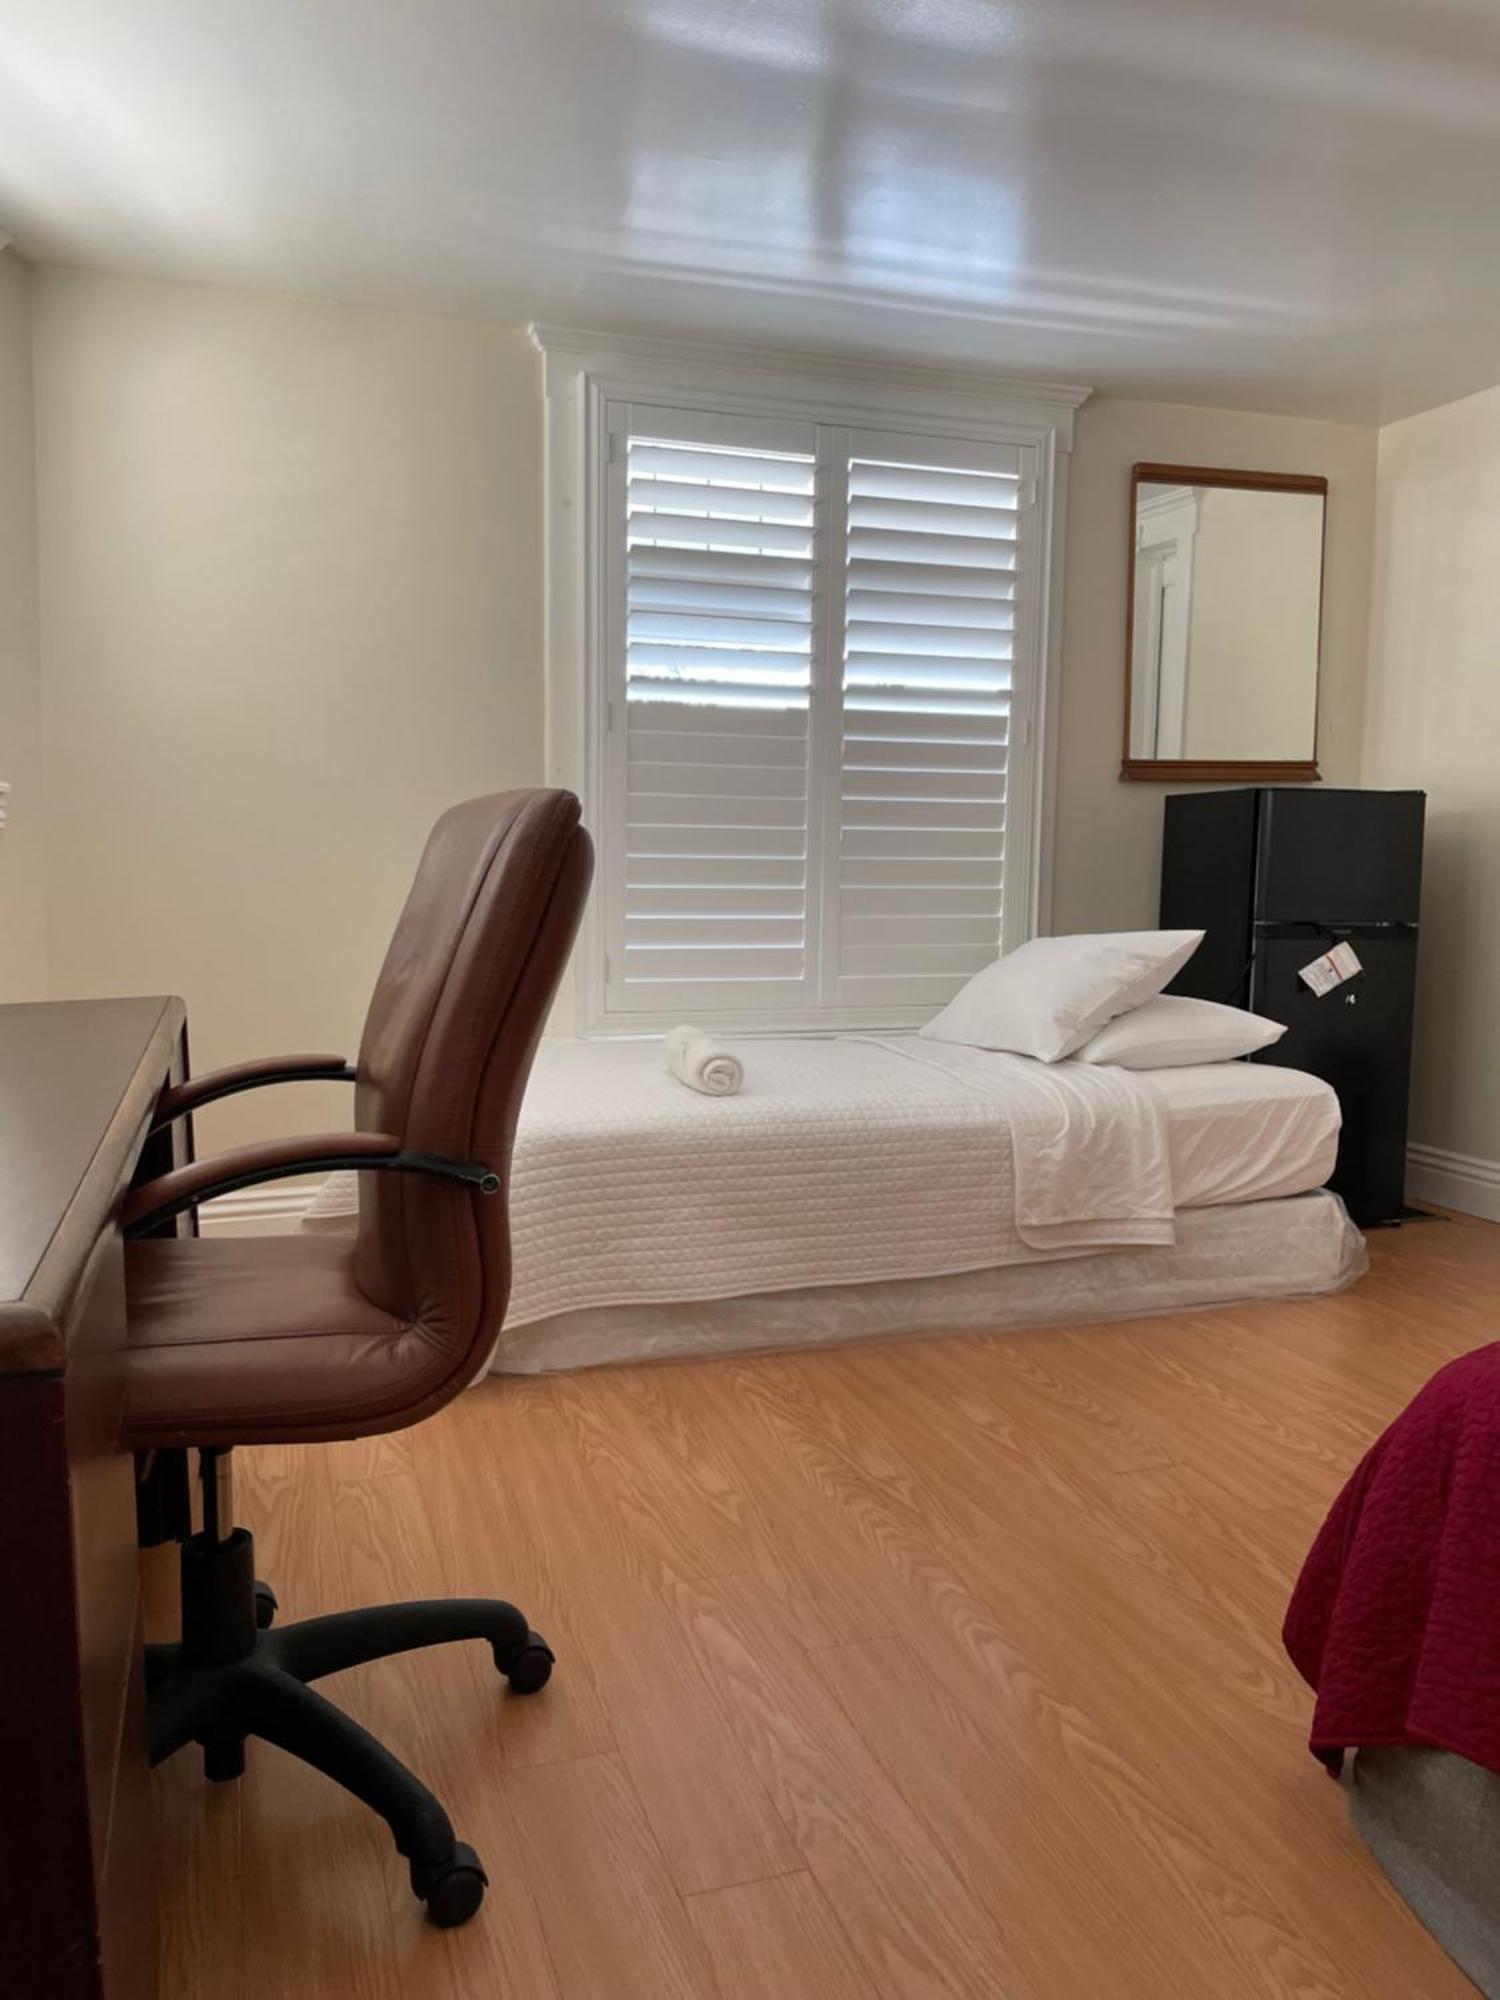 Spacious Private Los Angeles Bedroom With Ac & Wifi & Private Fridge Near Usc The Coliseum Exposition Park Bmo Stadium University Of Southern California Zewnętrze zdjęcie